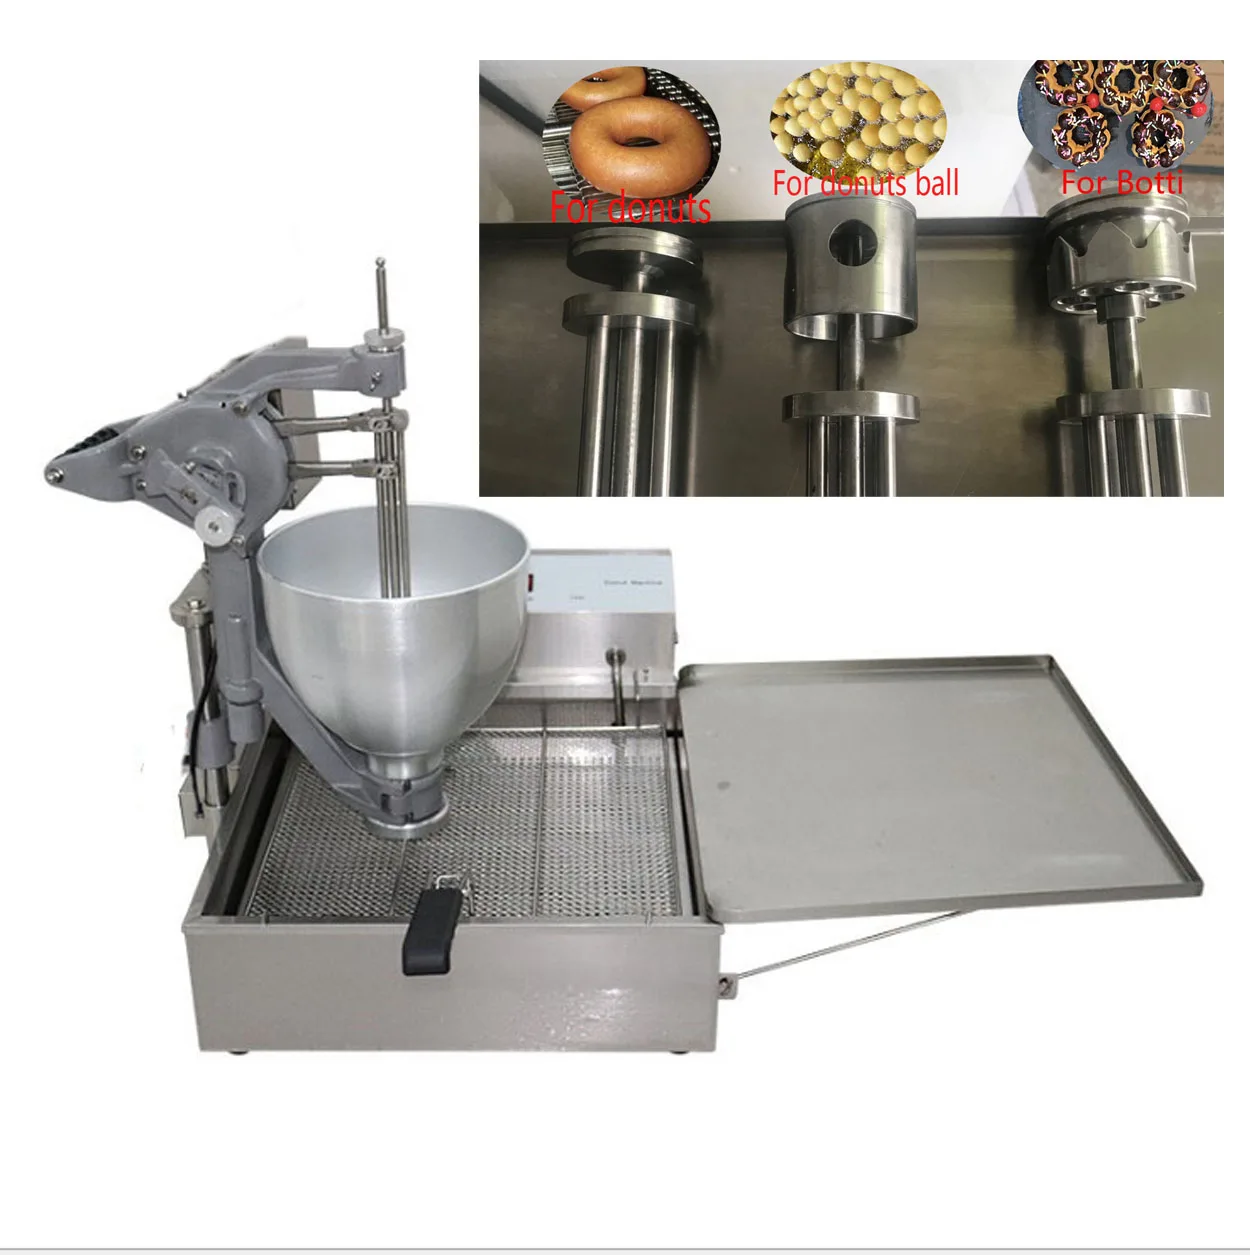 

Donuts Ball maker Machine come with 3 different mould Doughnut Fryer Maker Commercial Donut Making Machine Automatic Donut Maker